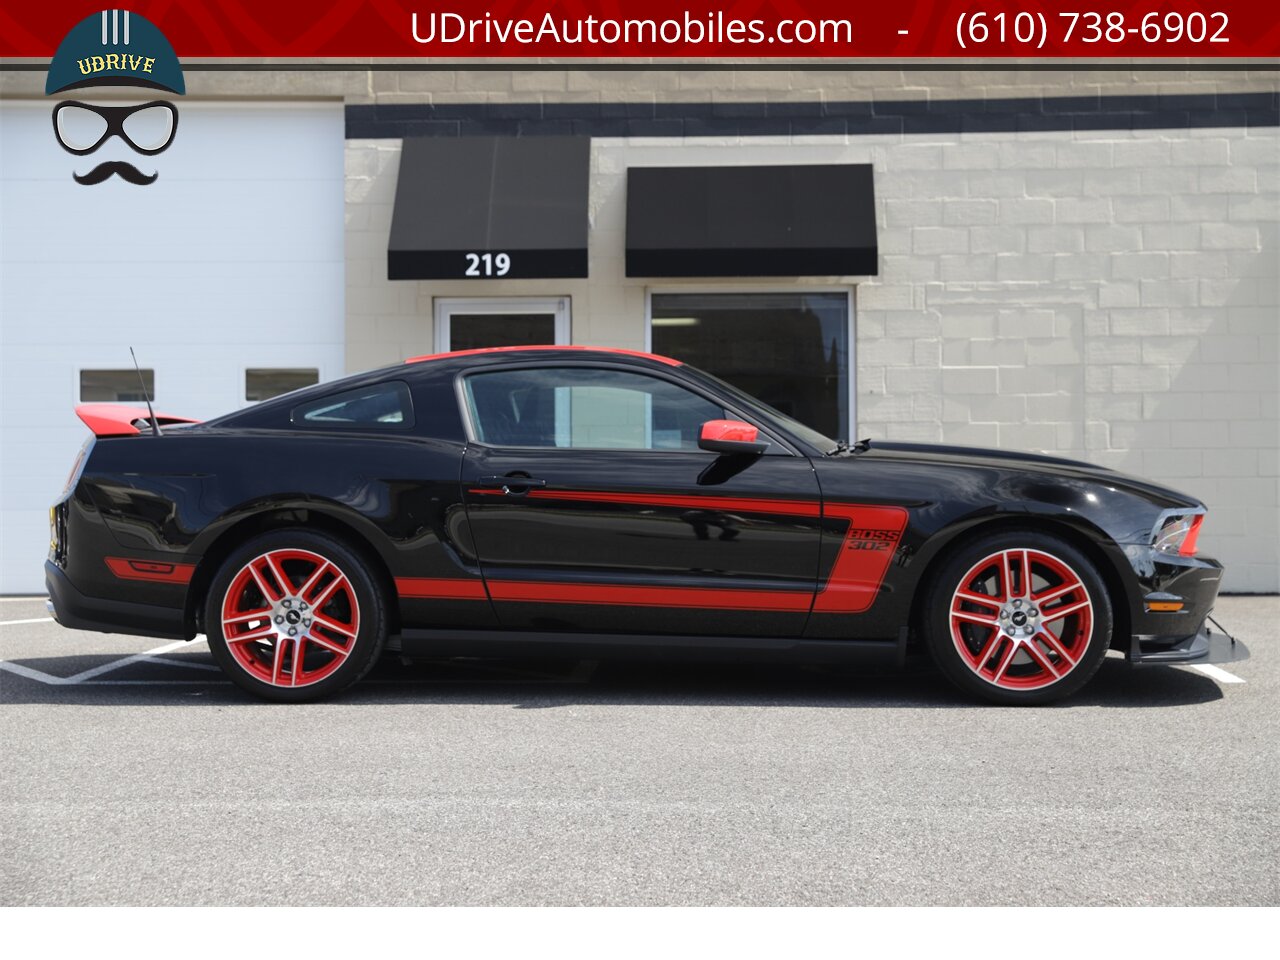 2012 Ford Mustang 866 Miles Boss 302 Laguna Seca #338 of 750  Red TracKey Activated - Photo 16 - West Chester, PA 19382